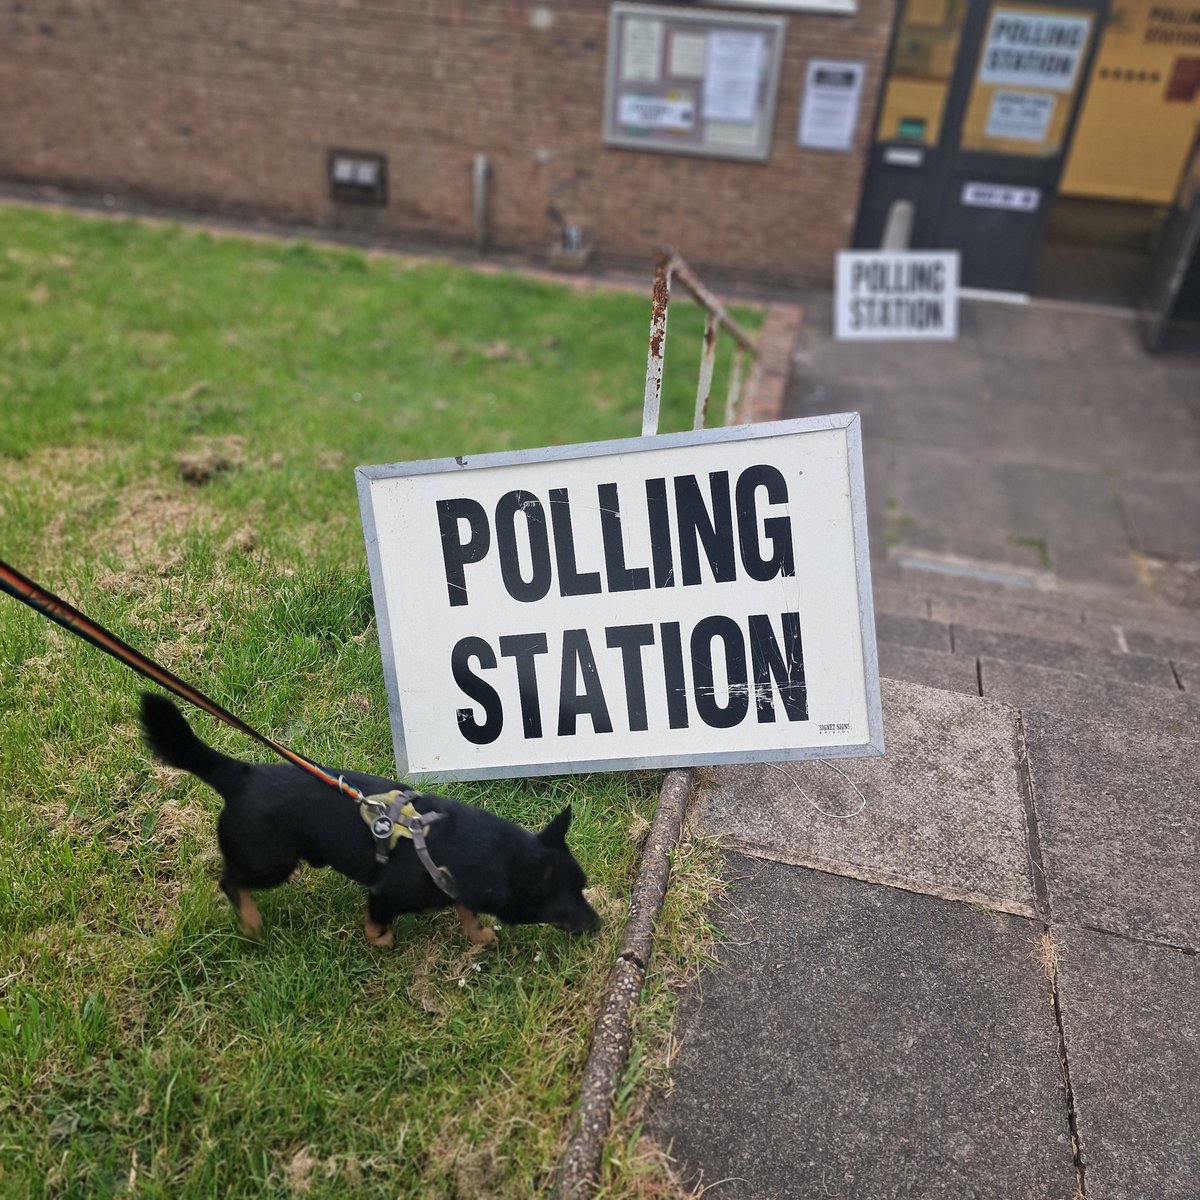 #dogsatpollingstations
Finished work, did my 2 hr journey home and popped in to vote...but what an opportunity....